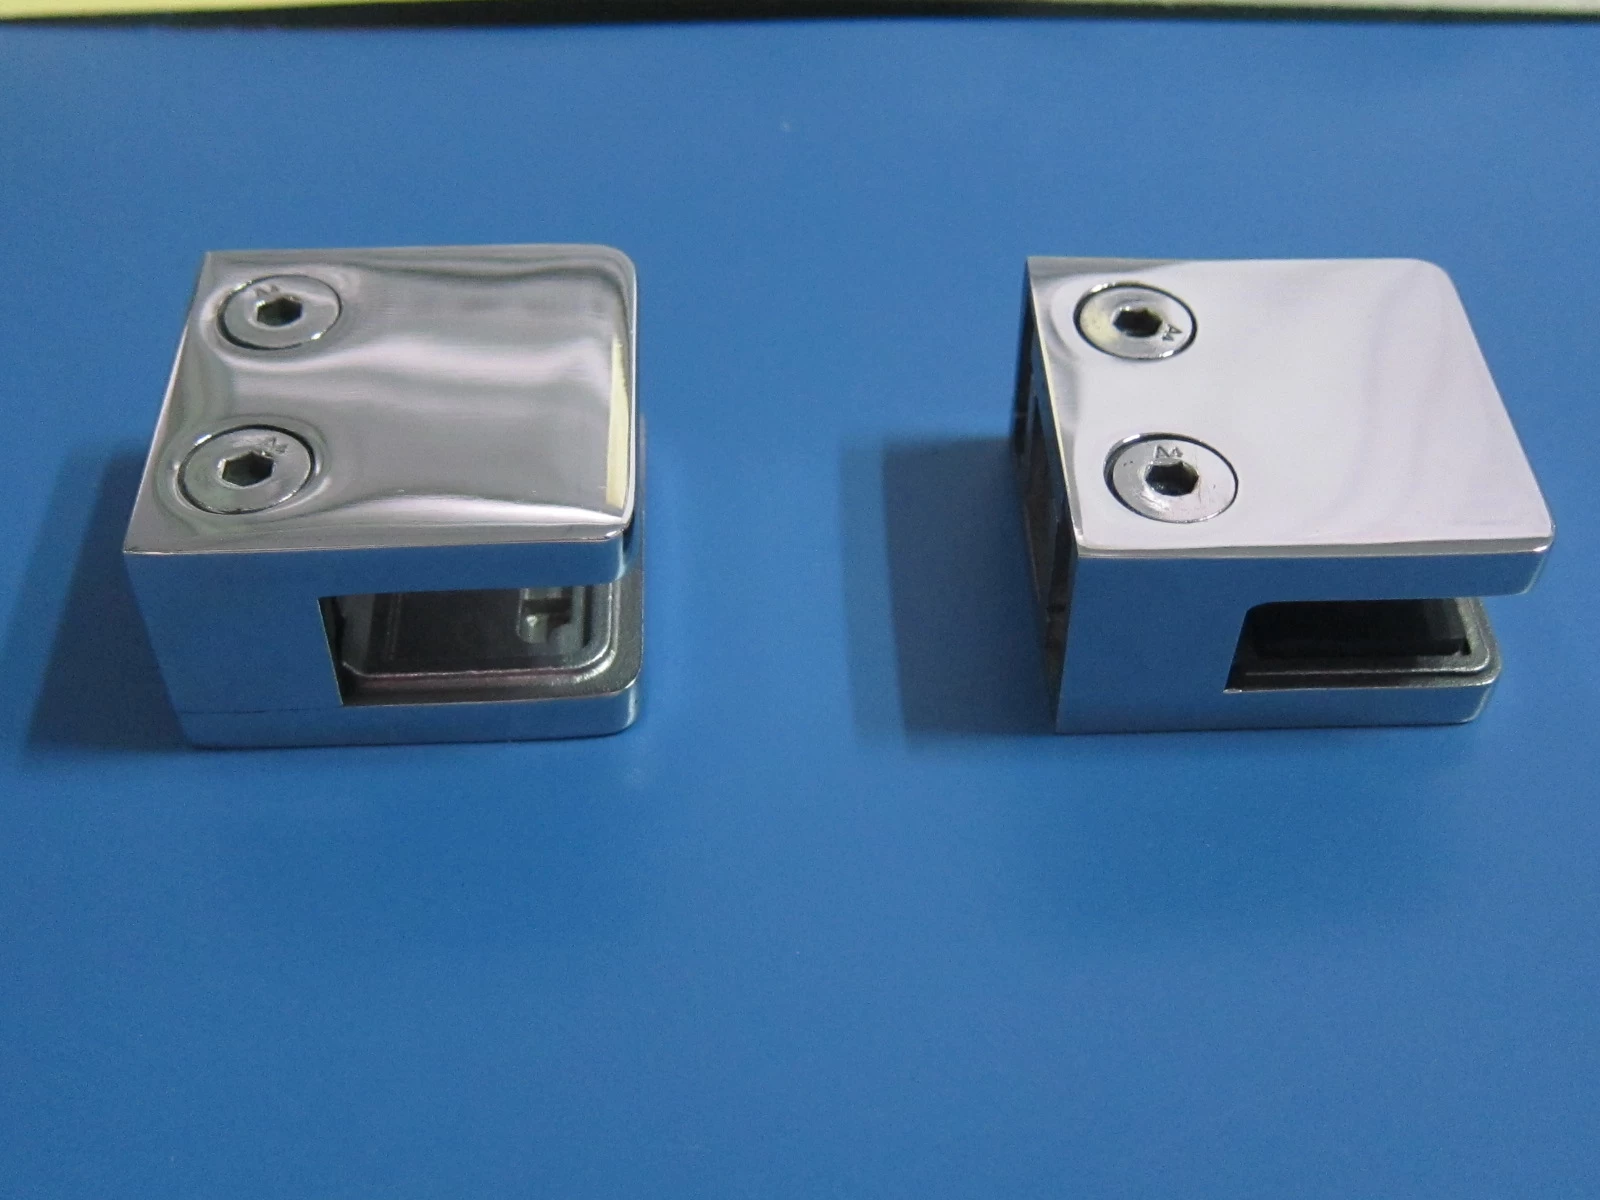 Square Glass Clamps with Flat back stainless steel 316 for Use With Square Tubing or Other Flat Surfaces